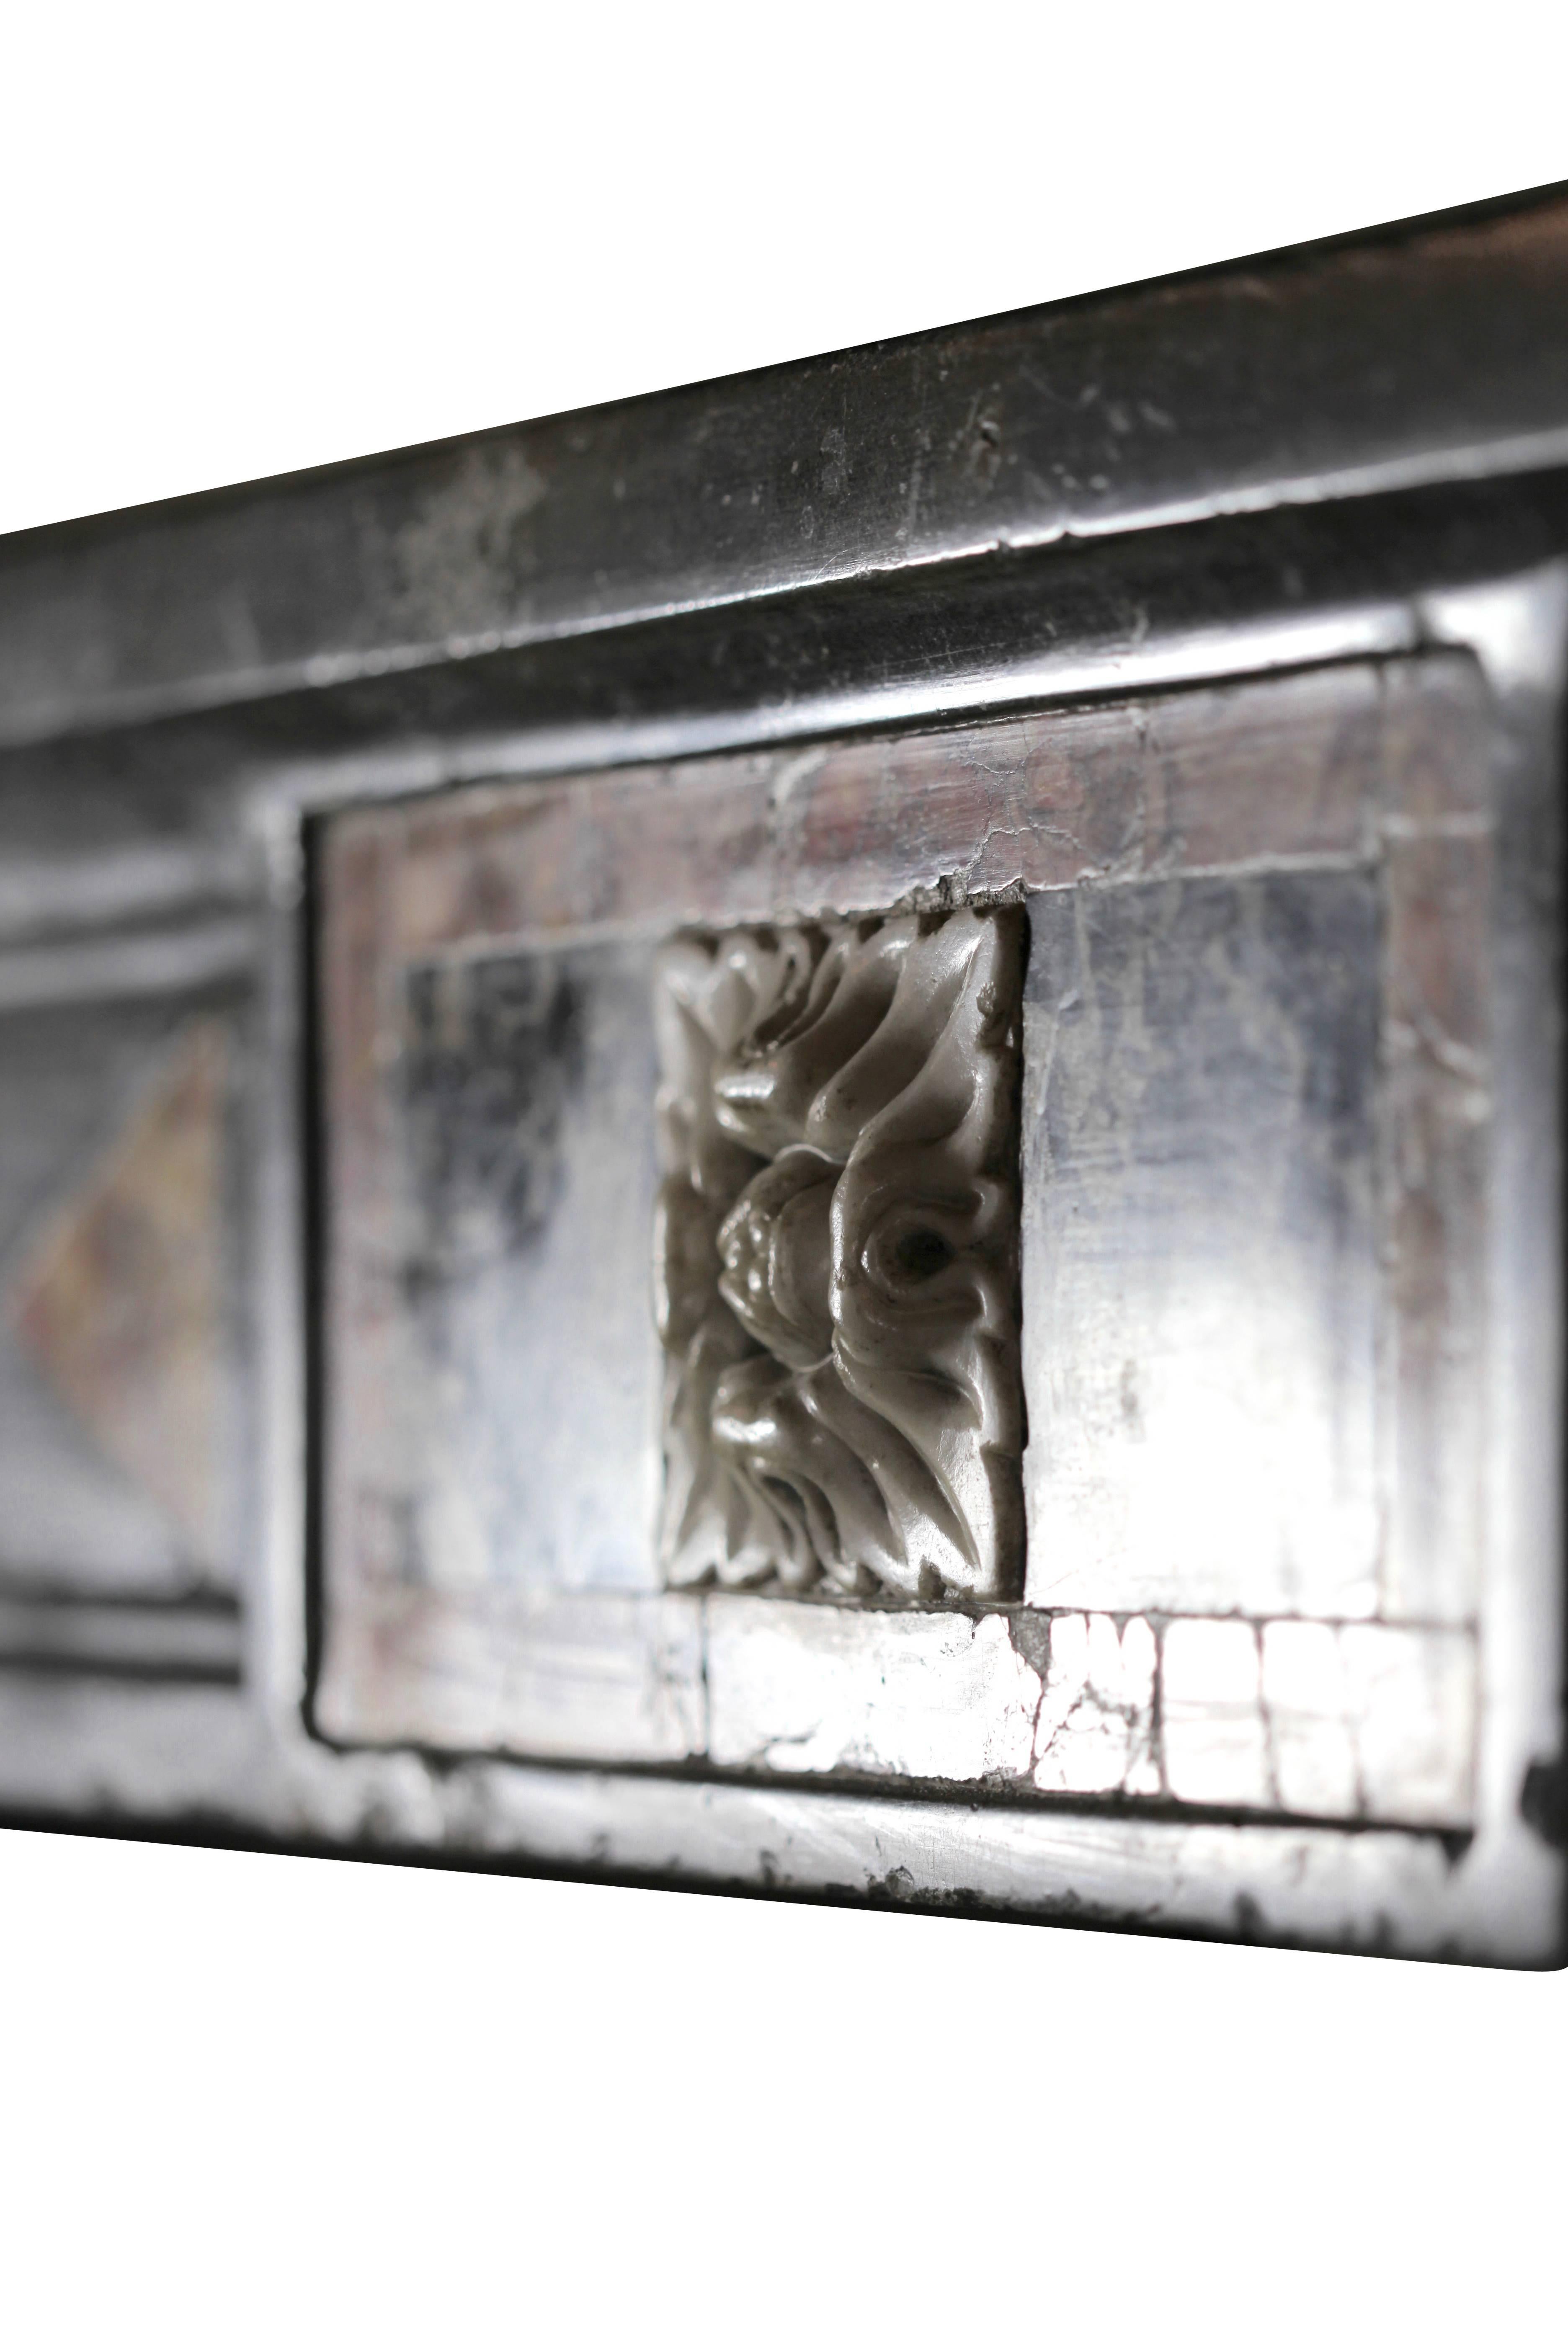 Louis XVI Fine European Rustic Antique Fireplace Surround with Marble Inlays For Sale